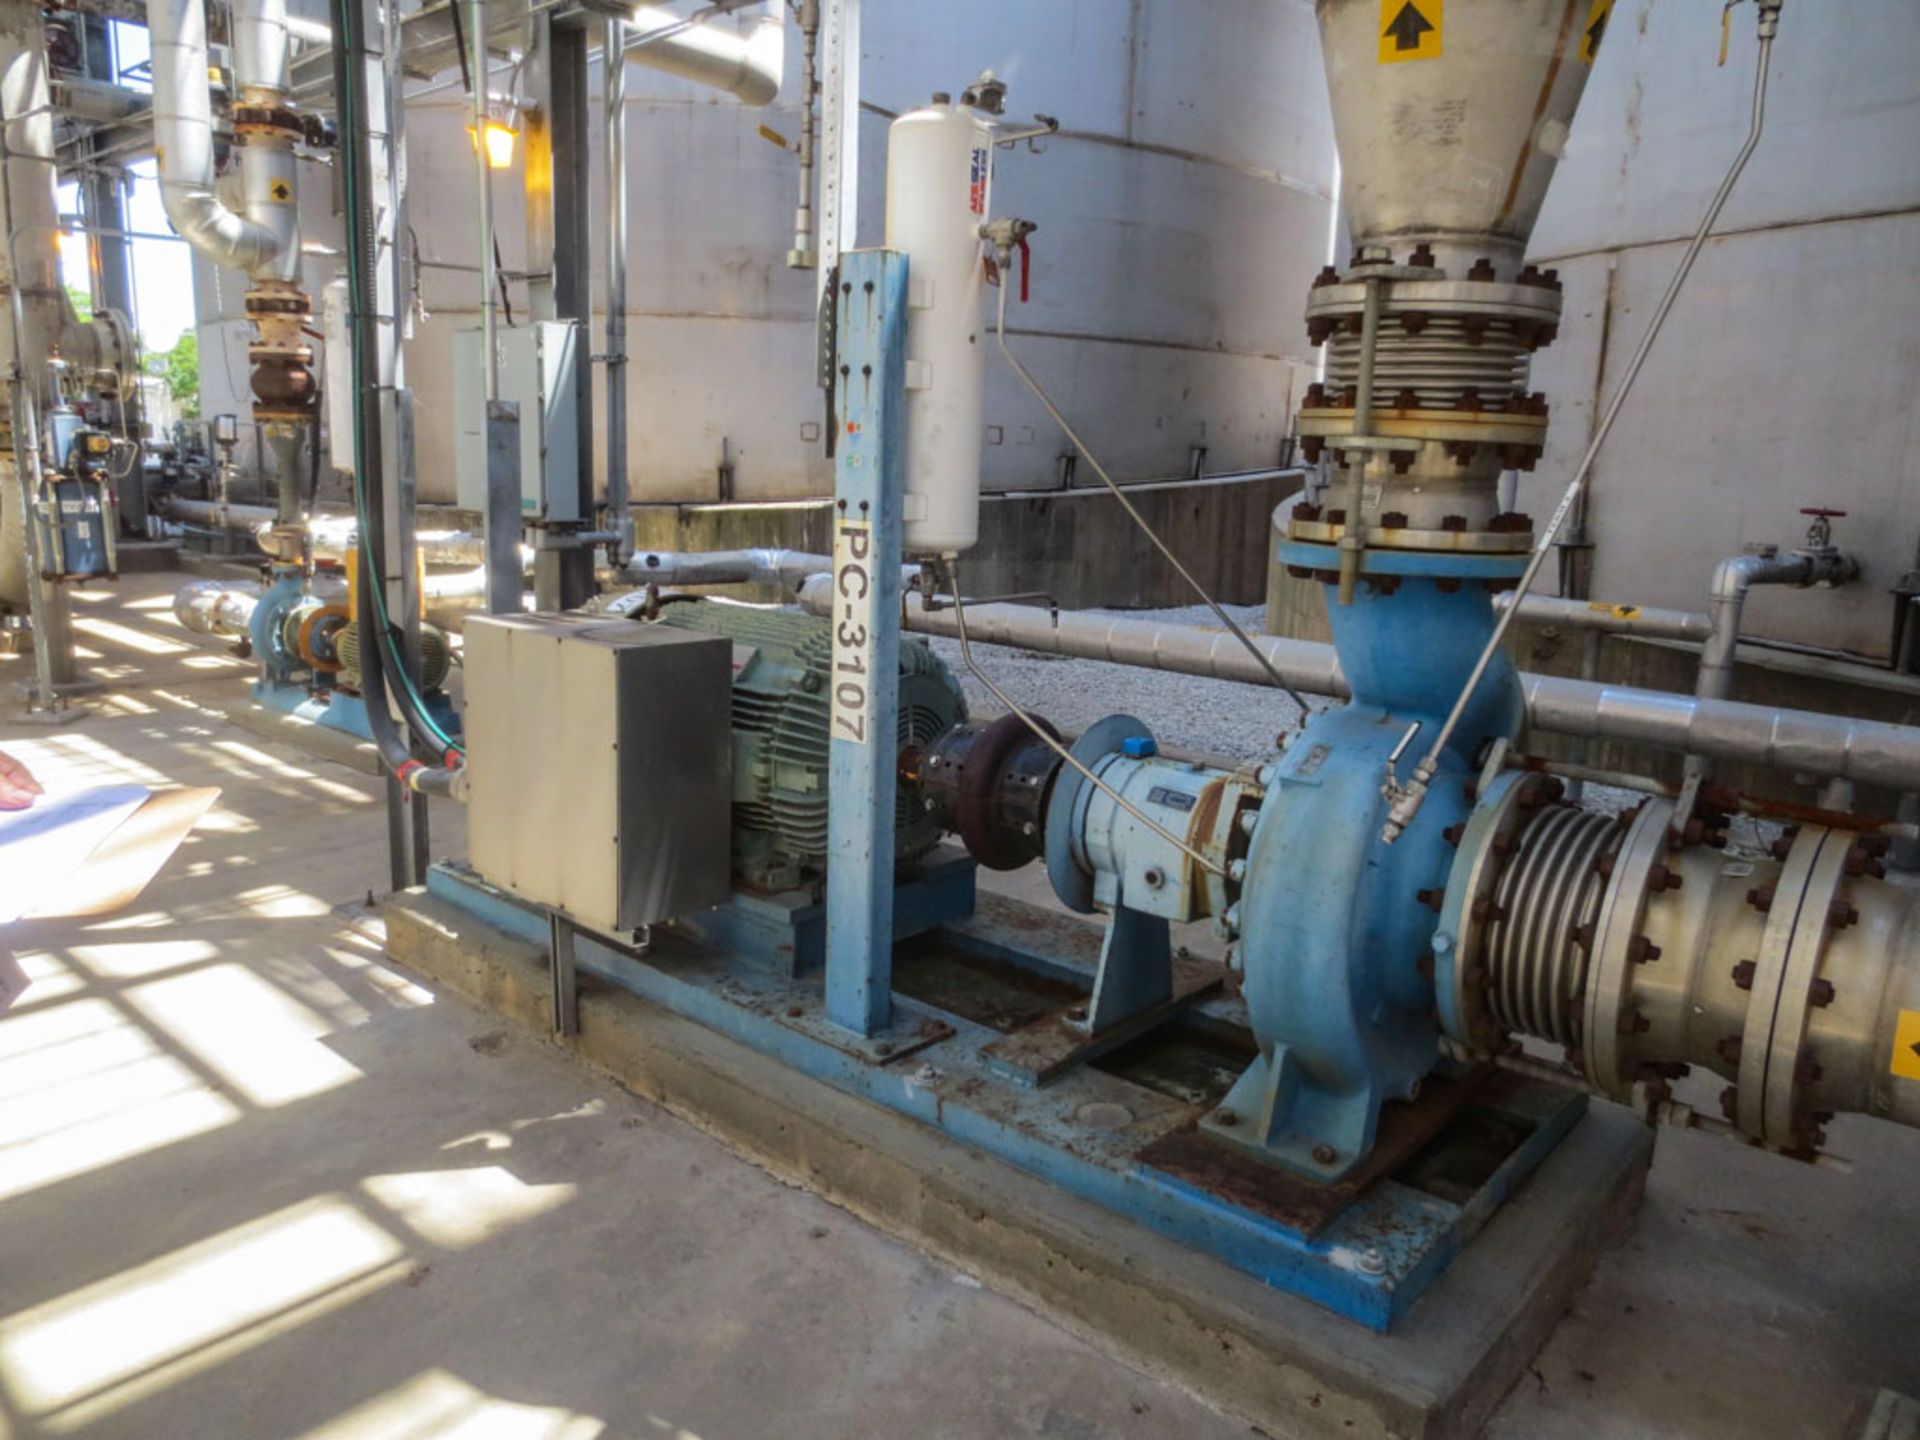 Goulds centrifugal pump, model 3180L. Size 10X12-19 with impeller dia Rigging/Loading Fee: $1000